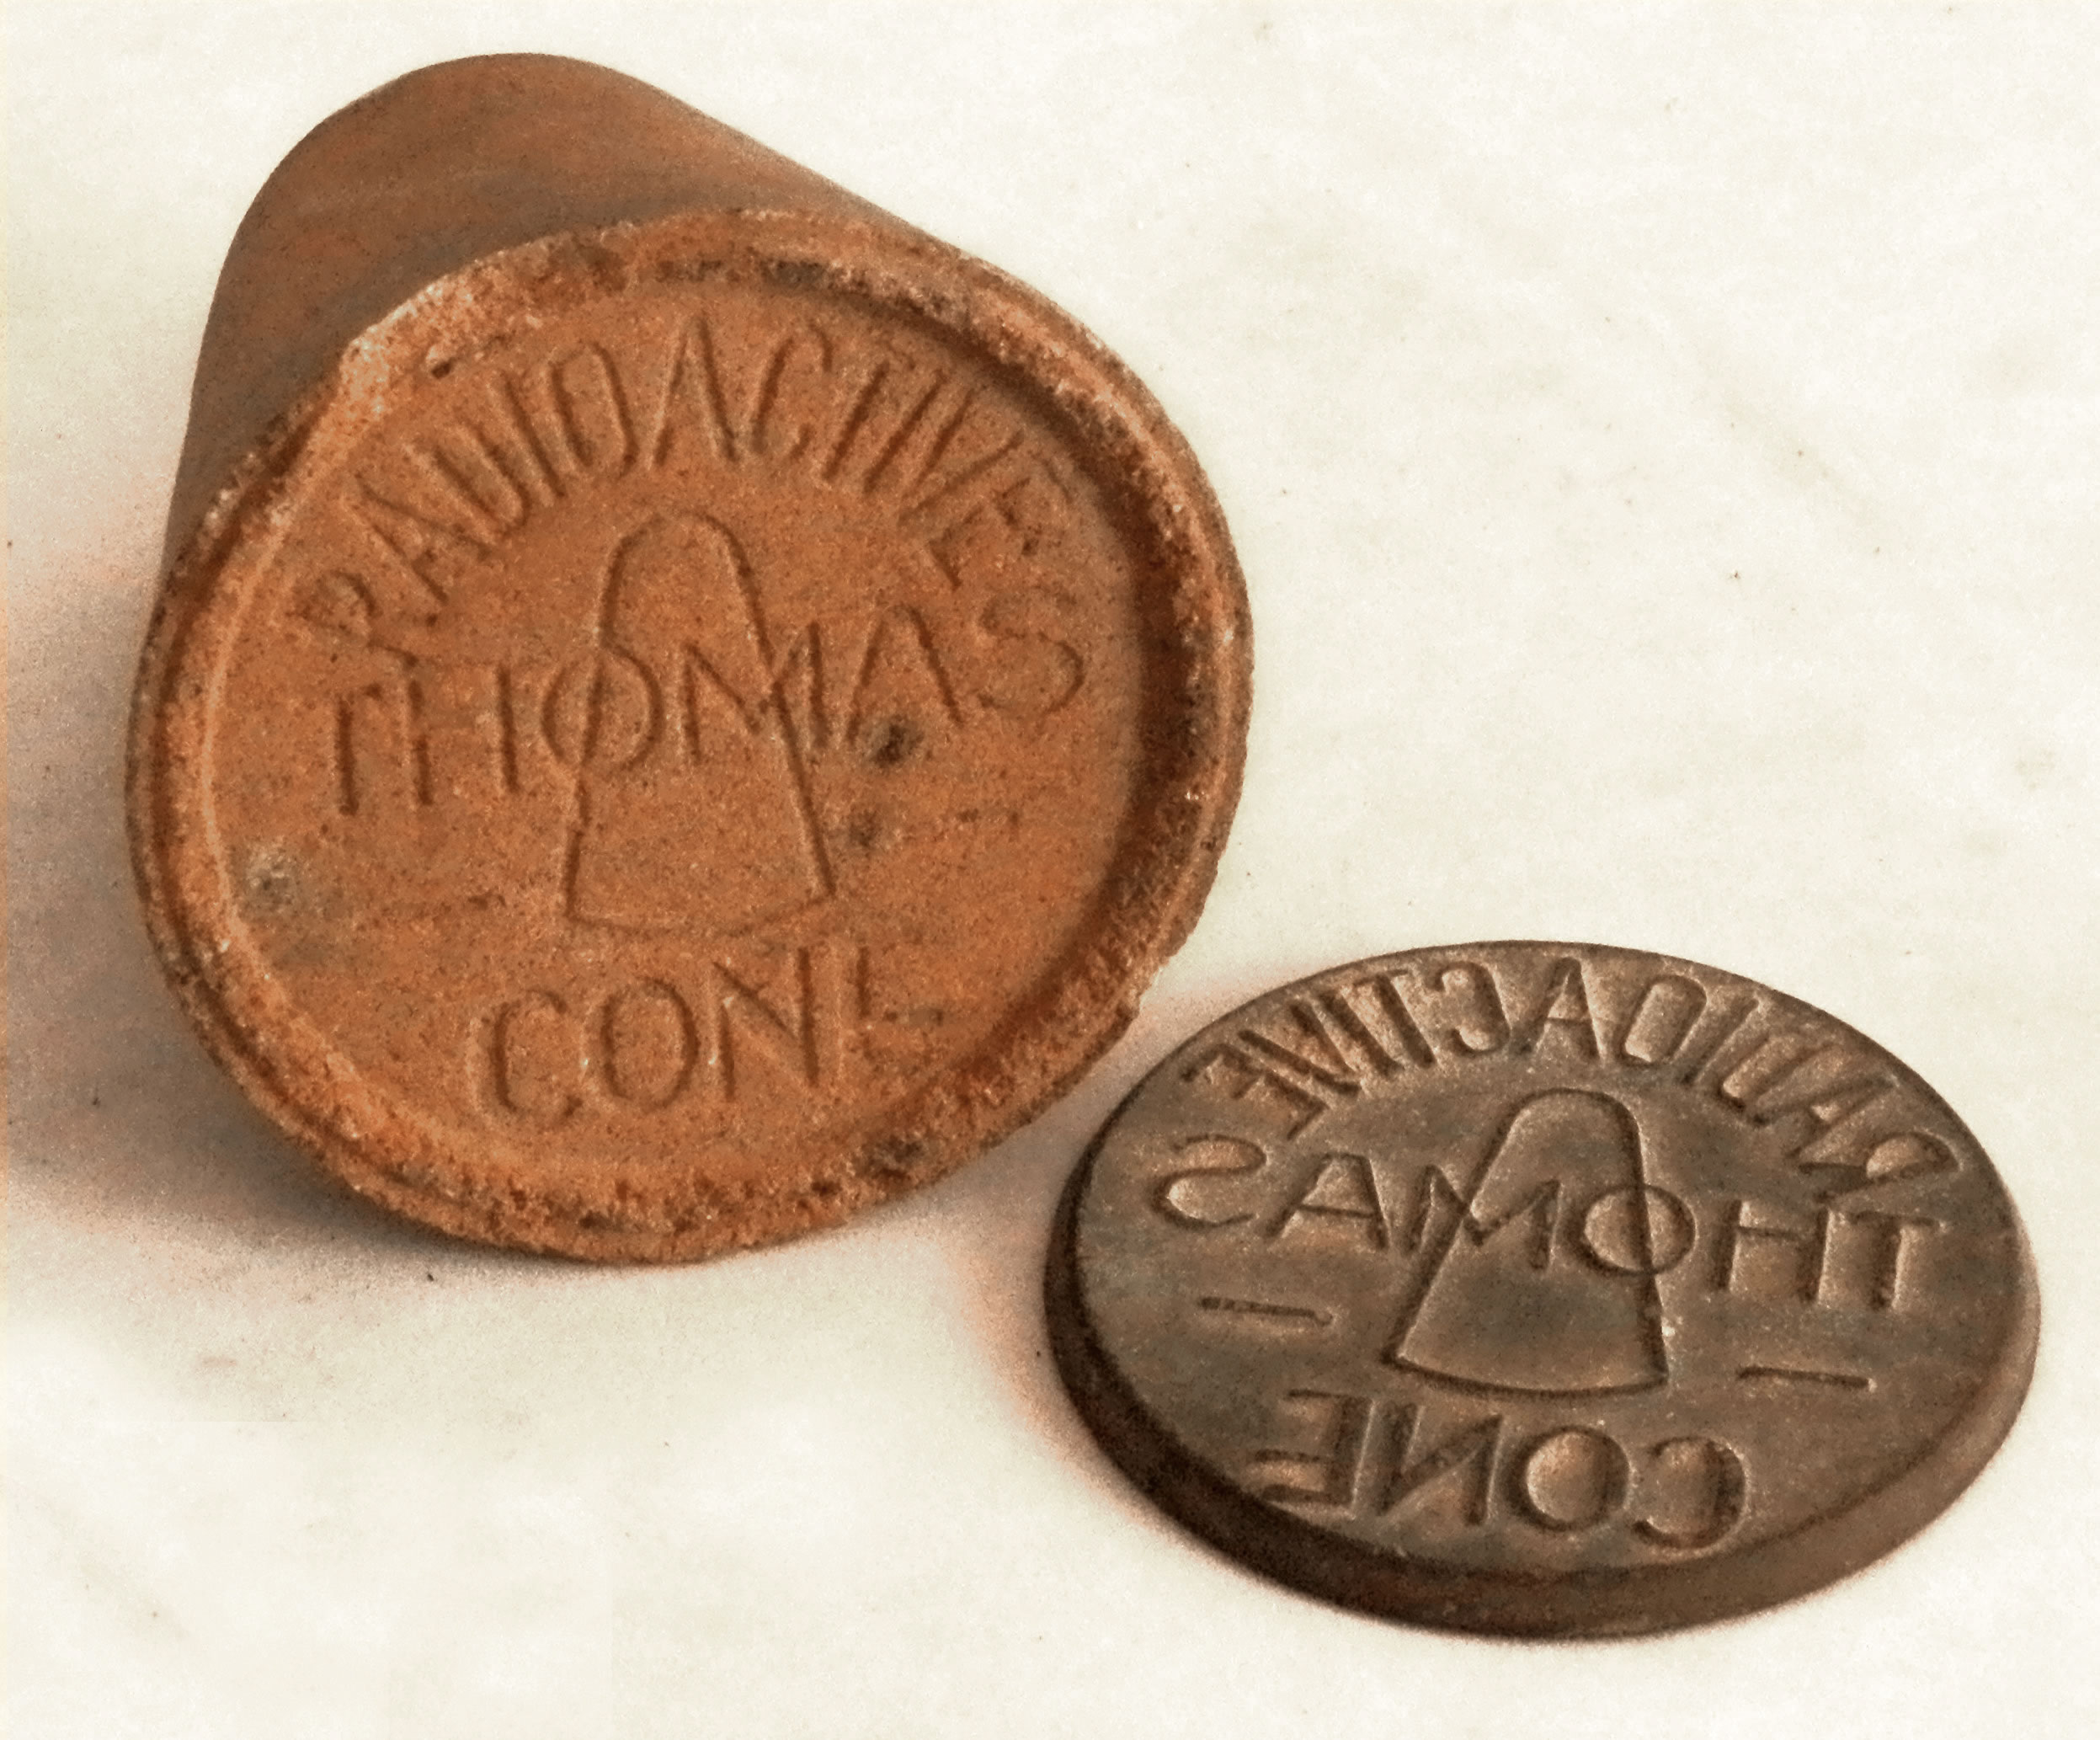 Mold and Stamps for the Thomas Radioactive Cone (ca. 1935-1955)